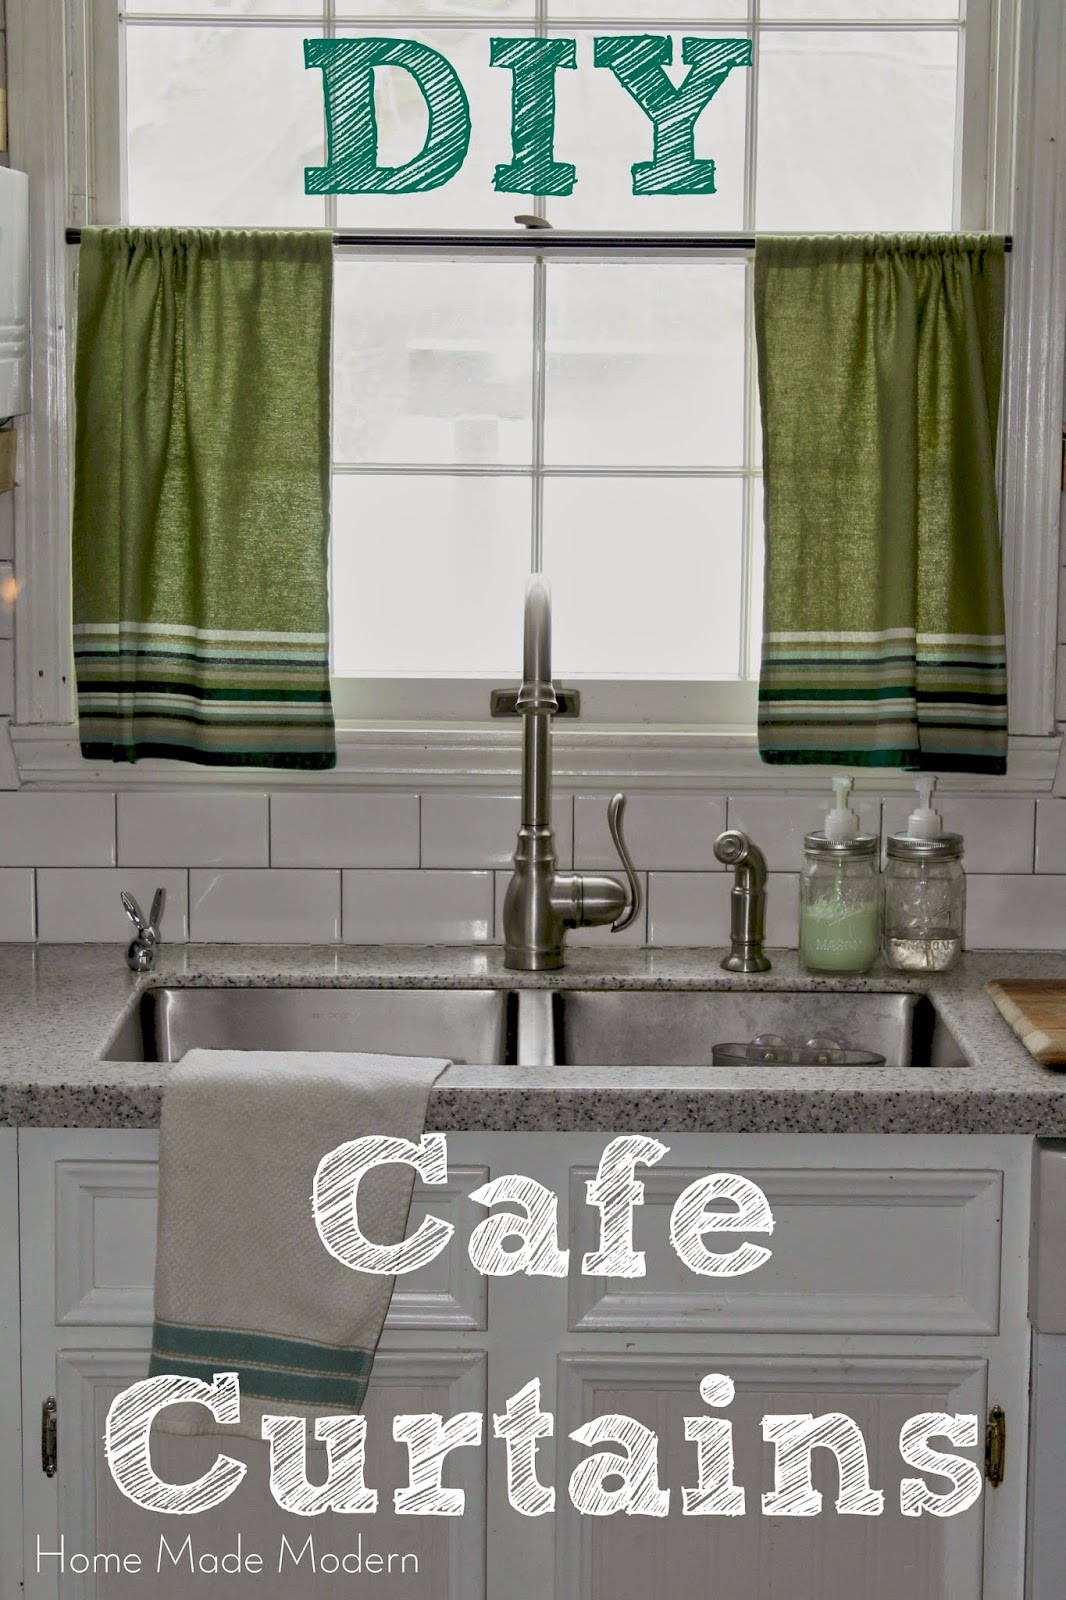 Kitchen Cafe Curtains
 Home Made Modern Cafe Curtains from Kitchen Towels